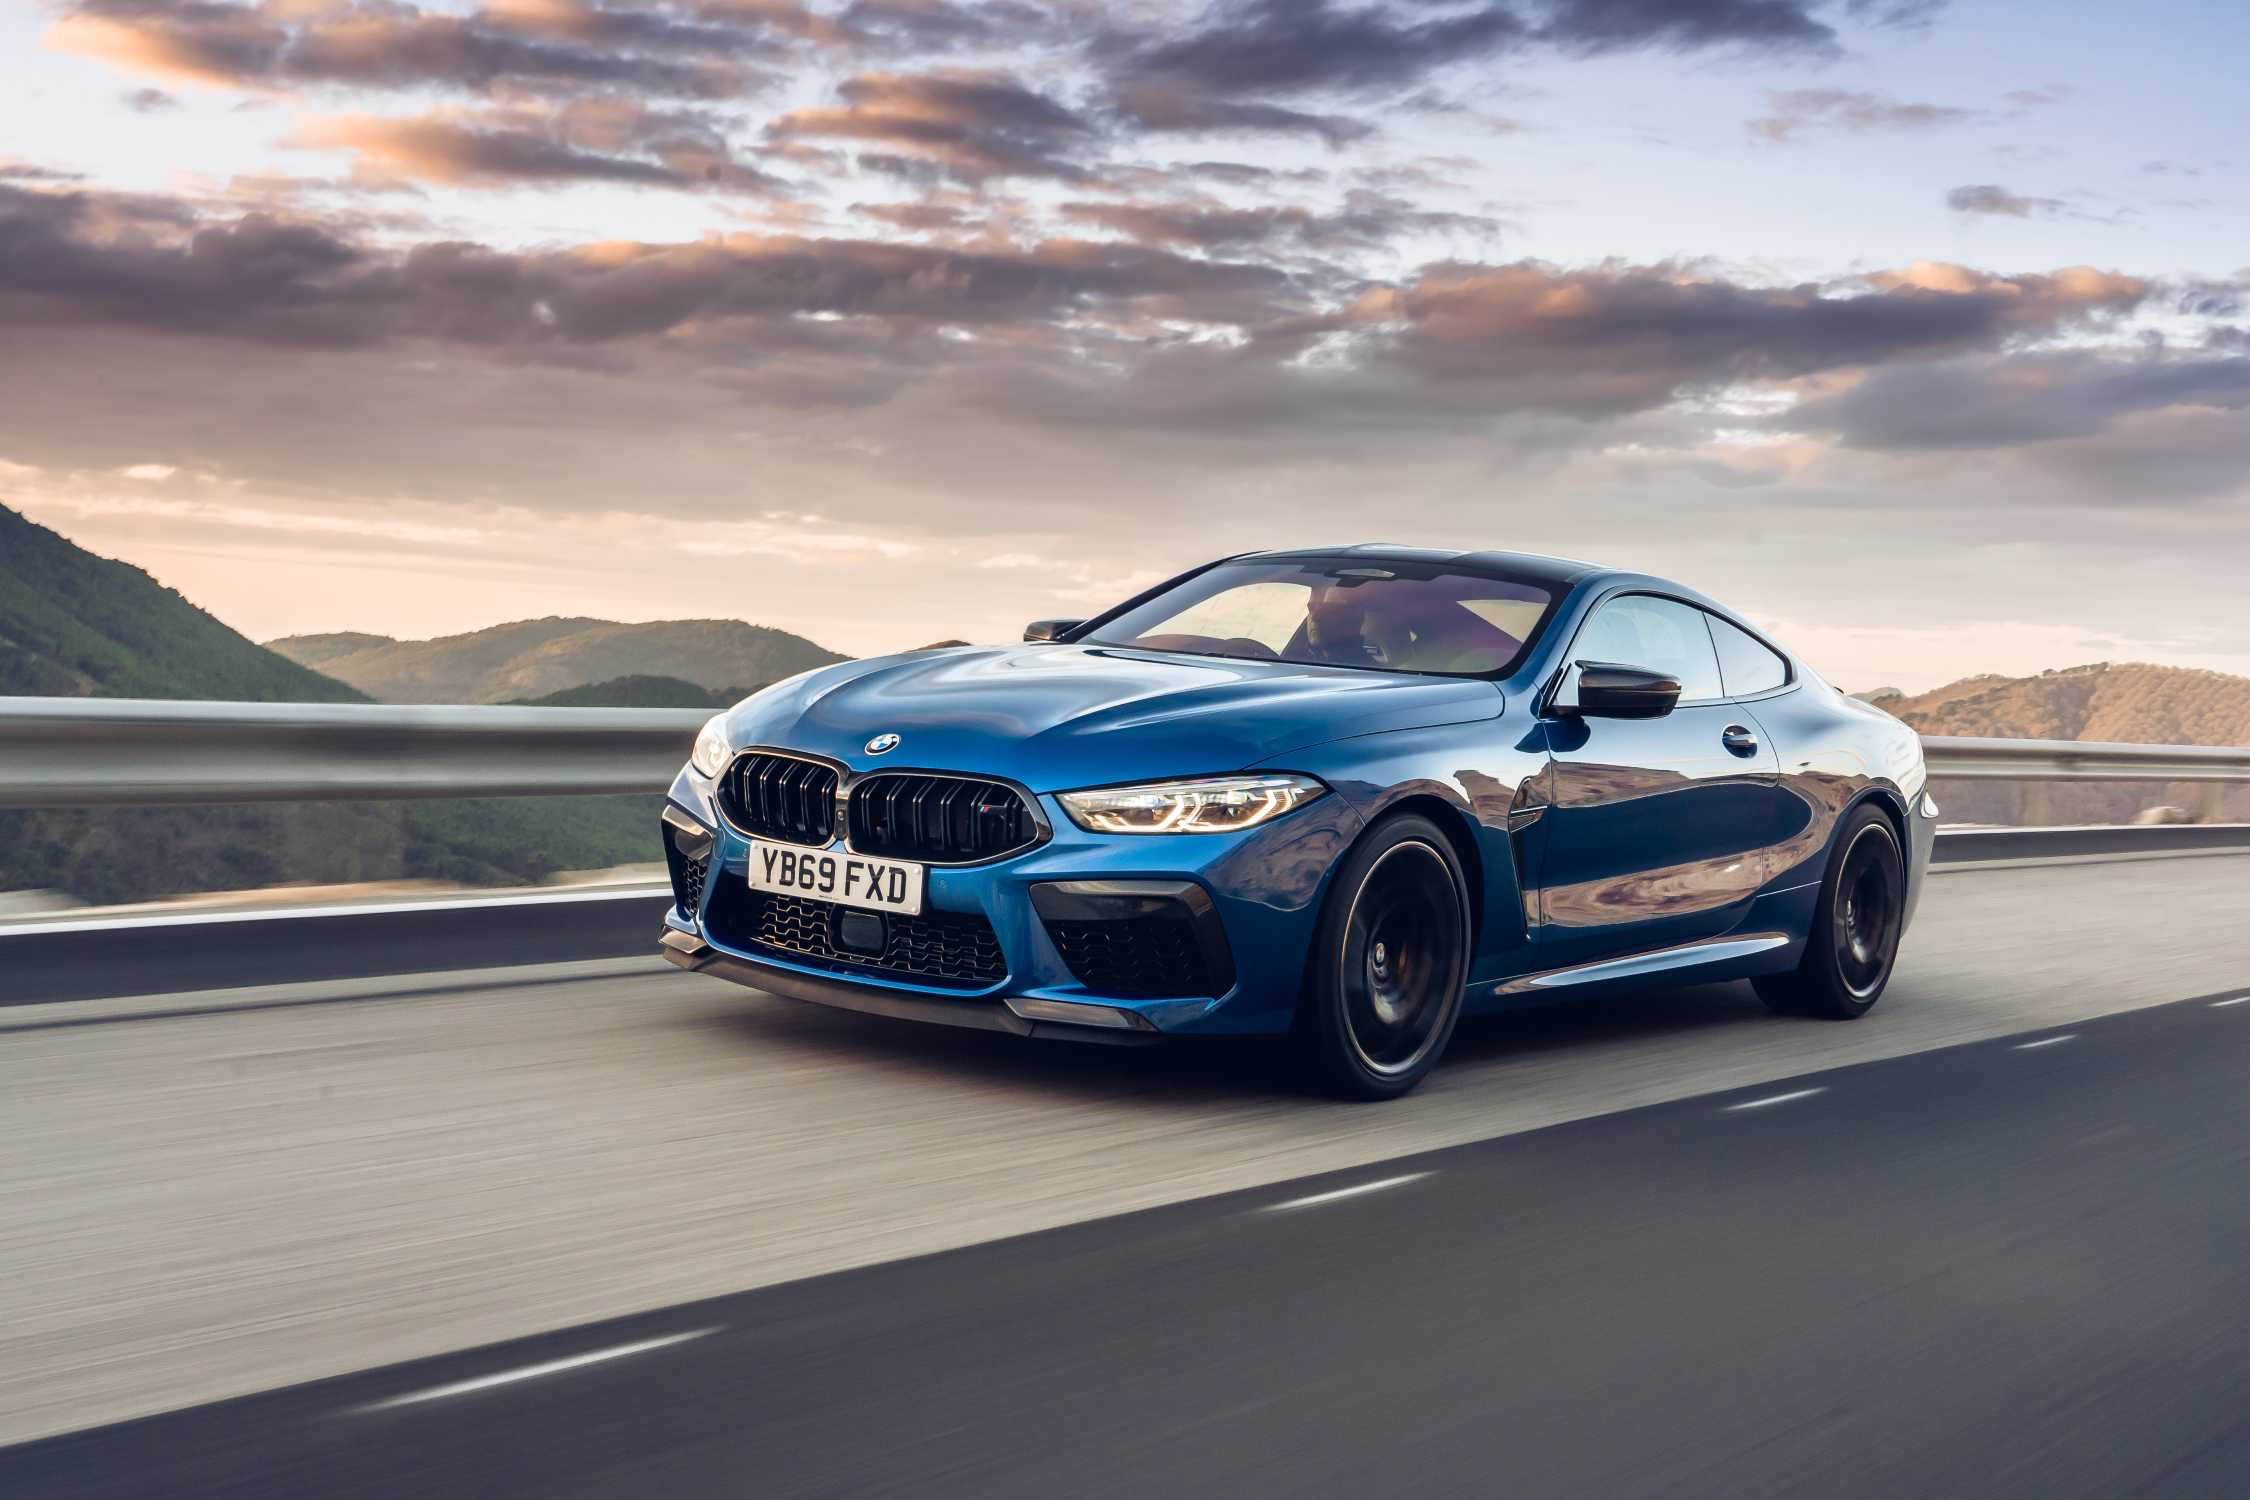 First Ever Bmw M8 Competition Coupe And Gran Coupe Confirmed For New Zealand Launch In Q2